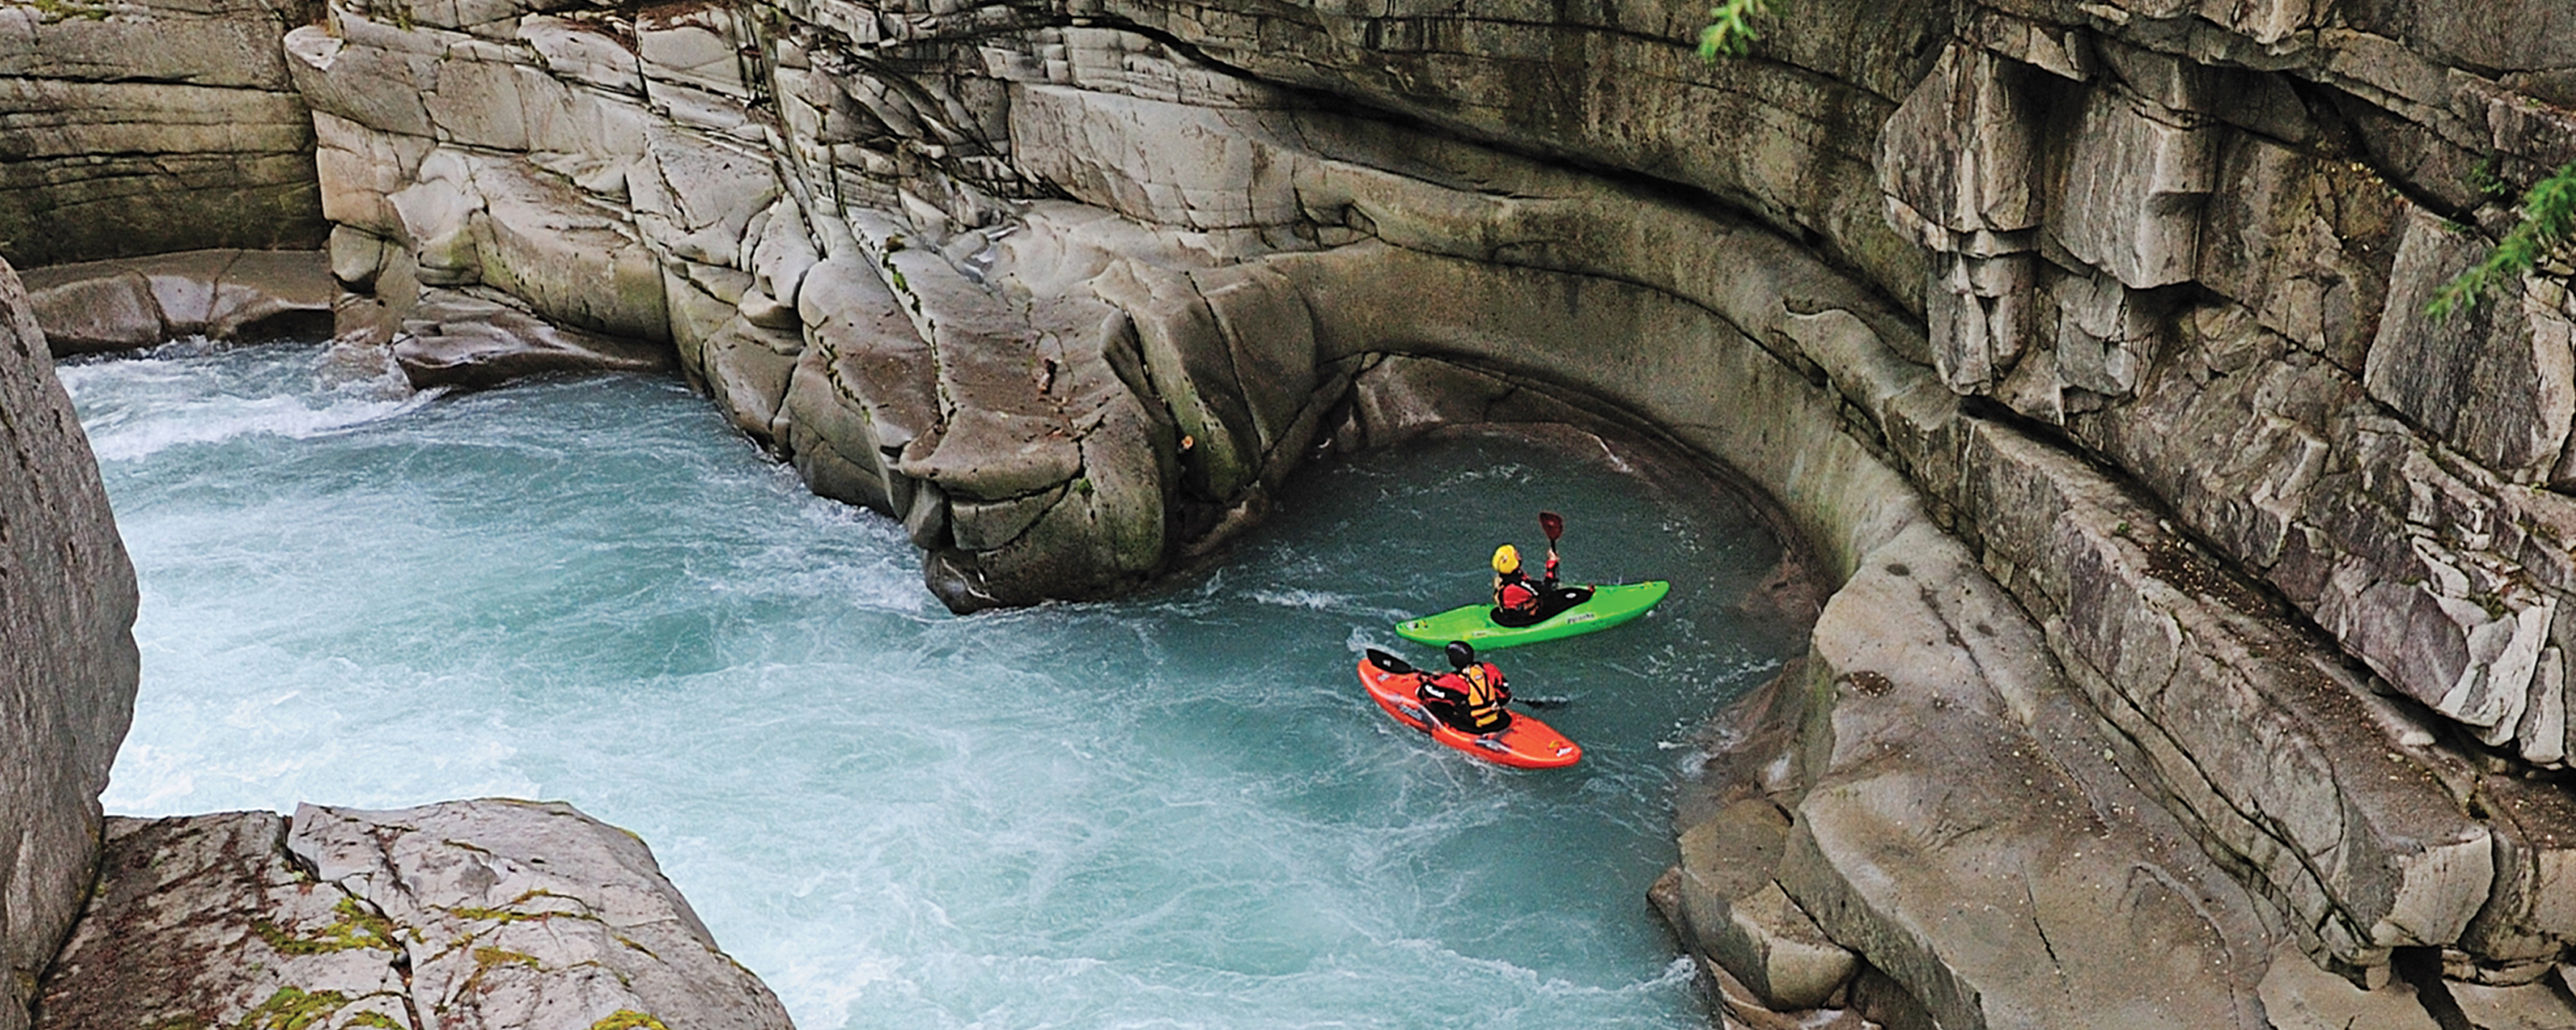 Whitewater Kayaking Gear List Everything A Paddler Needs For Running Rapids